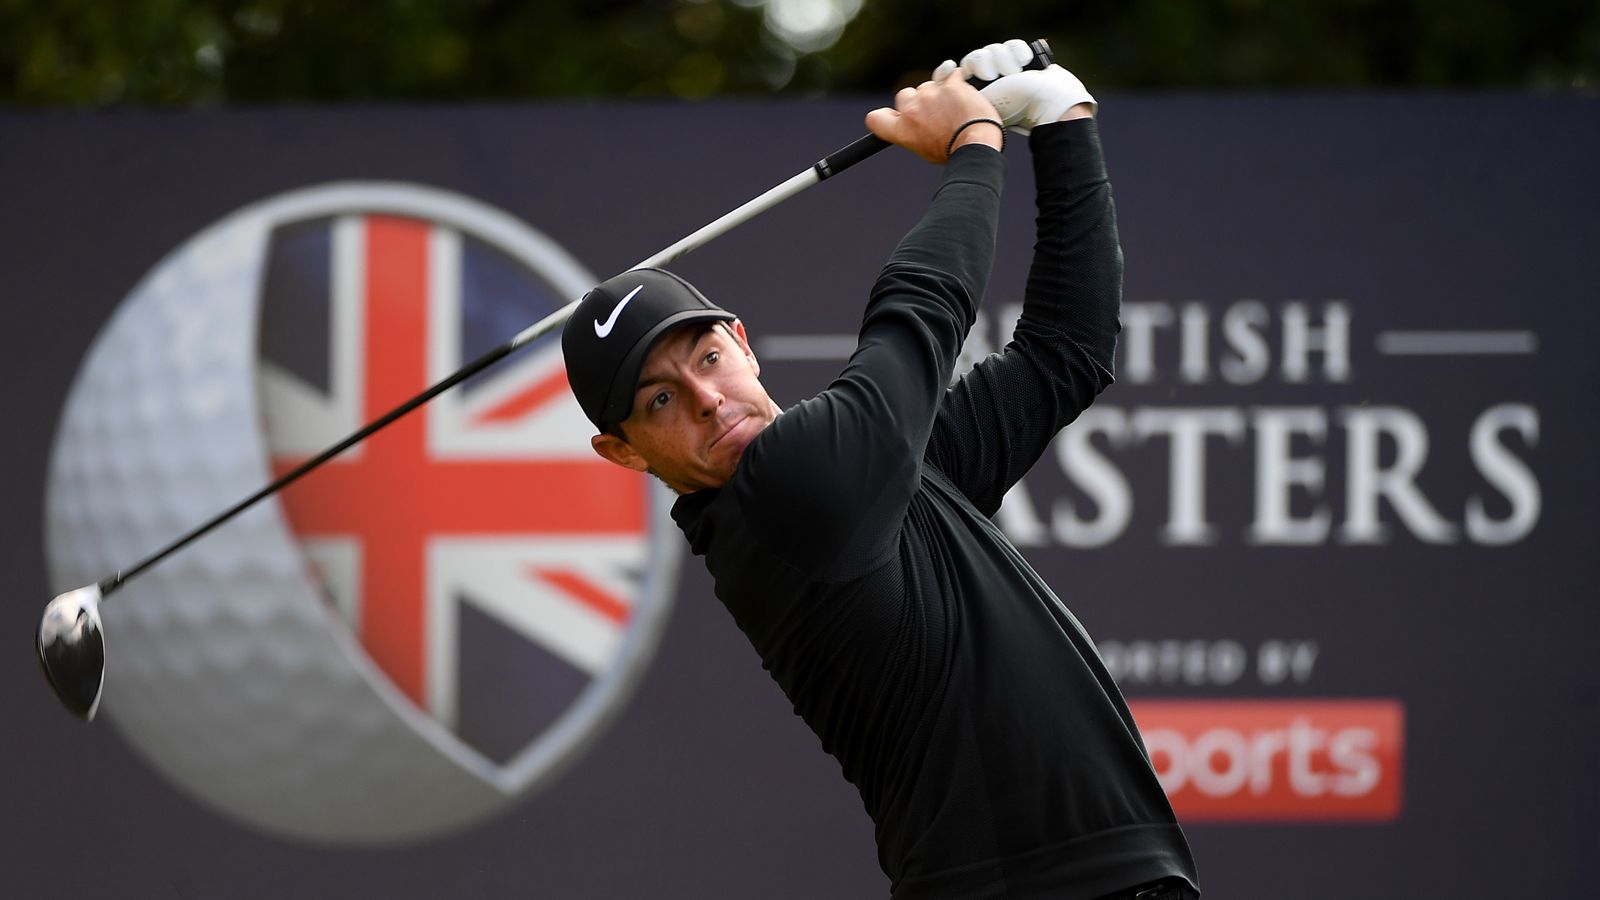 Rory McIlroy posts strong openinground 67 at the British Masters